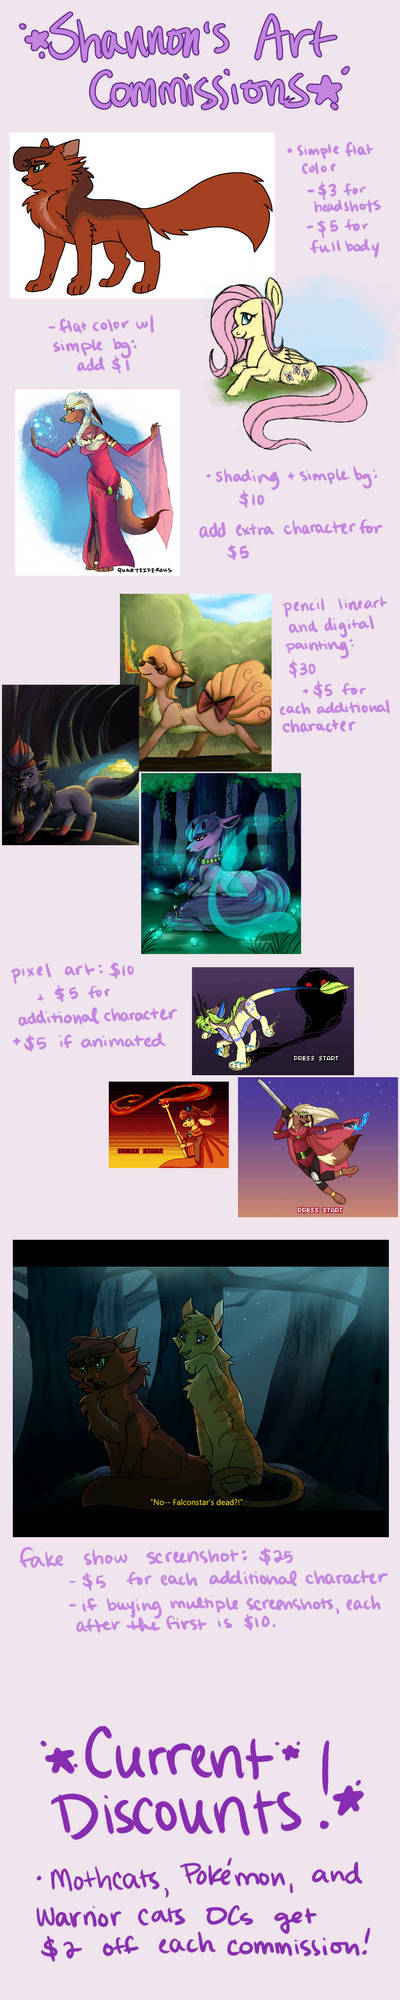 SHANNON'S ART COMMISSIONS - All slots open!